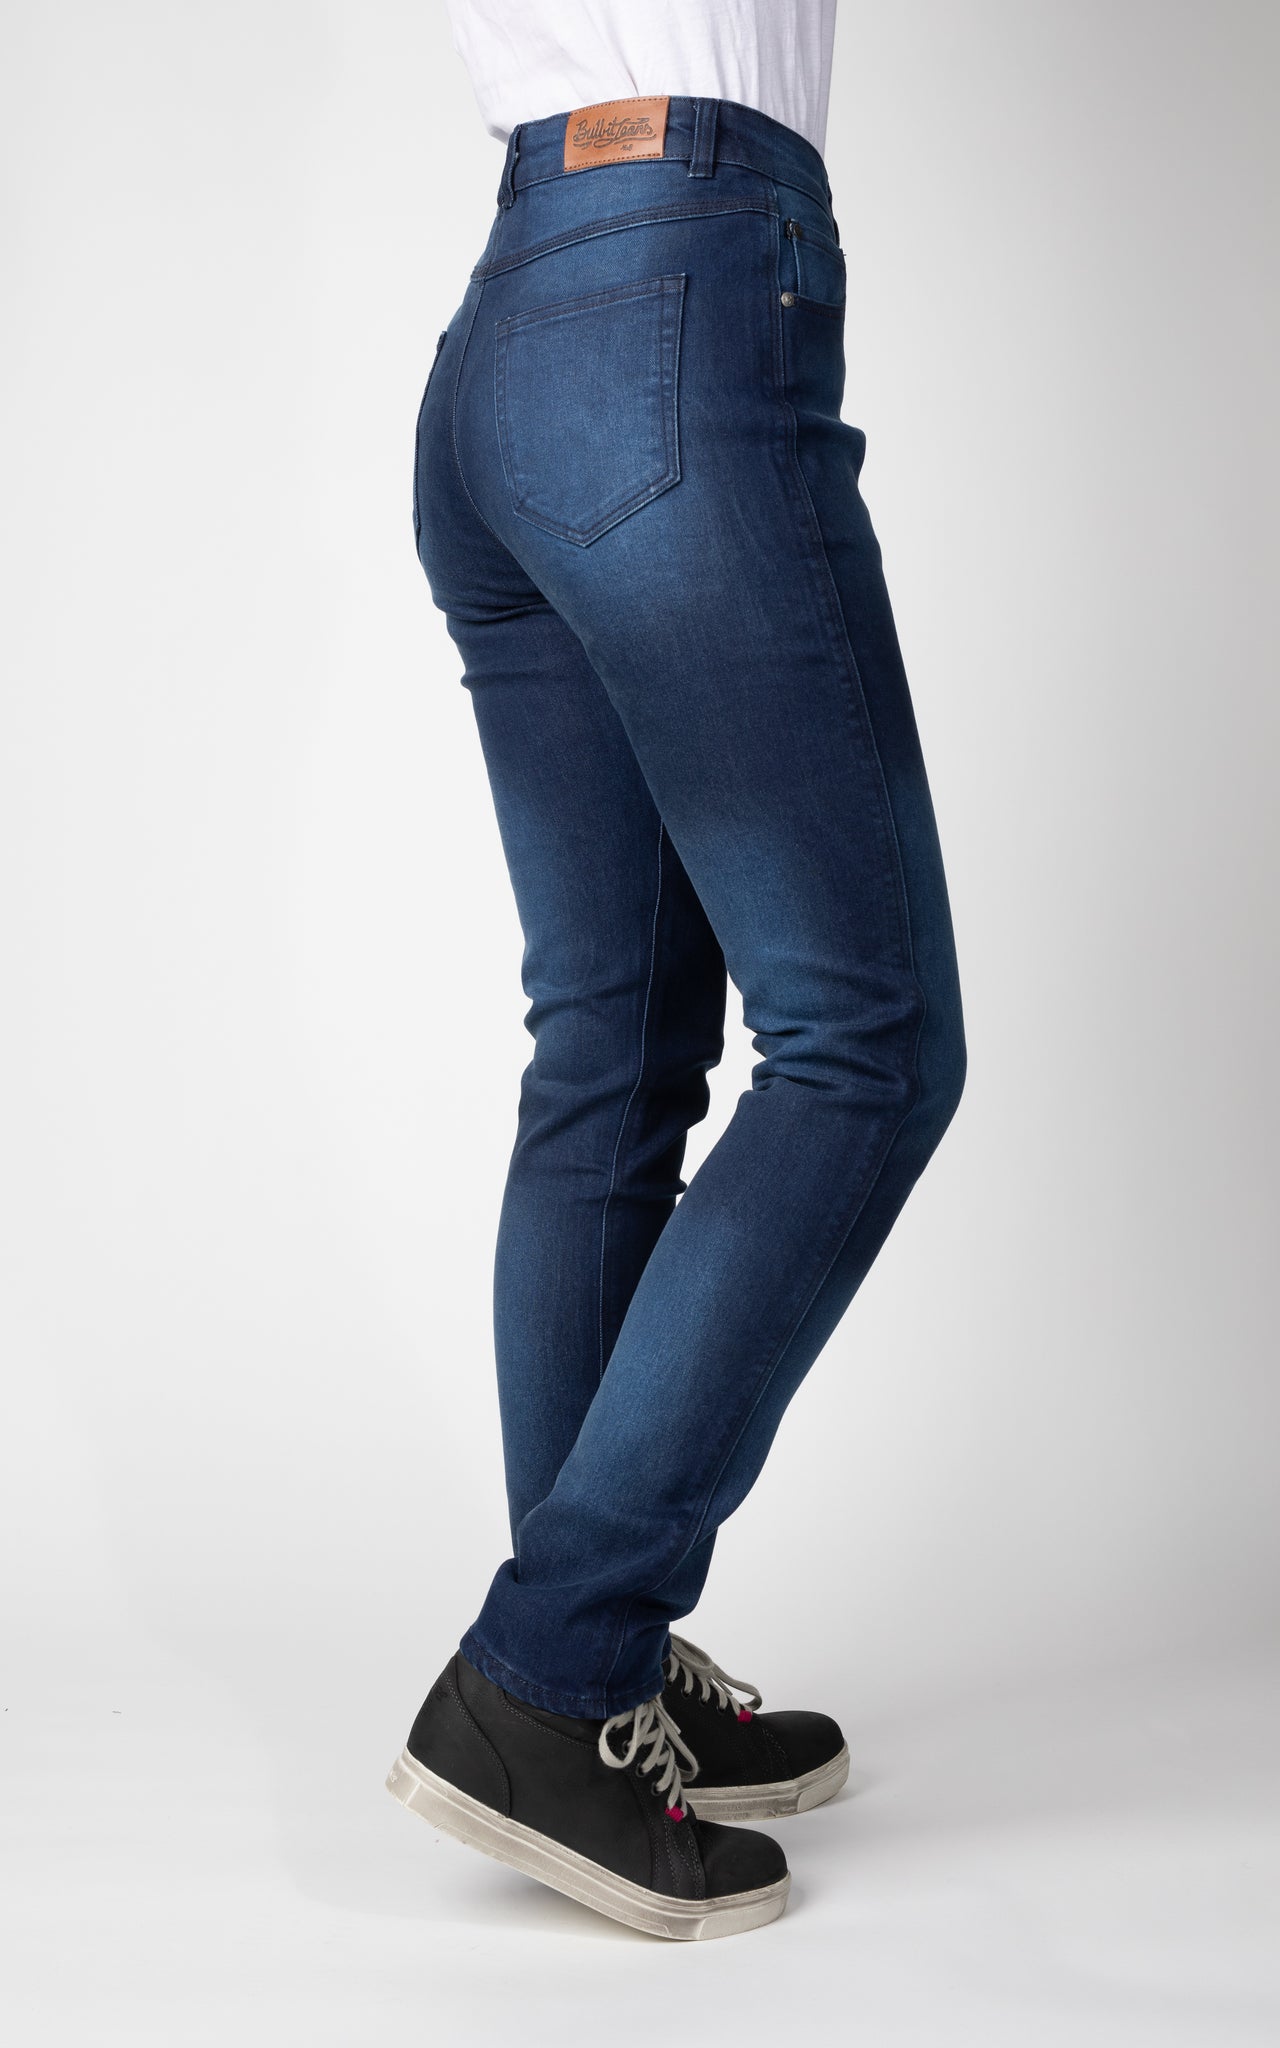 Woman&#39;s legs from behind wearing blue lady motorcycle jeans from Bull-it